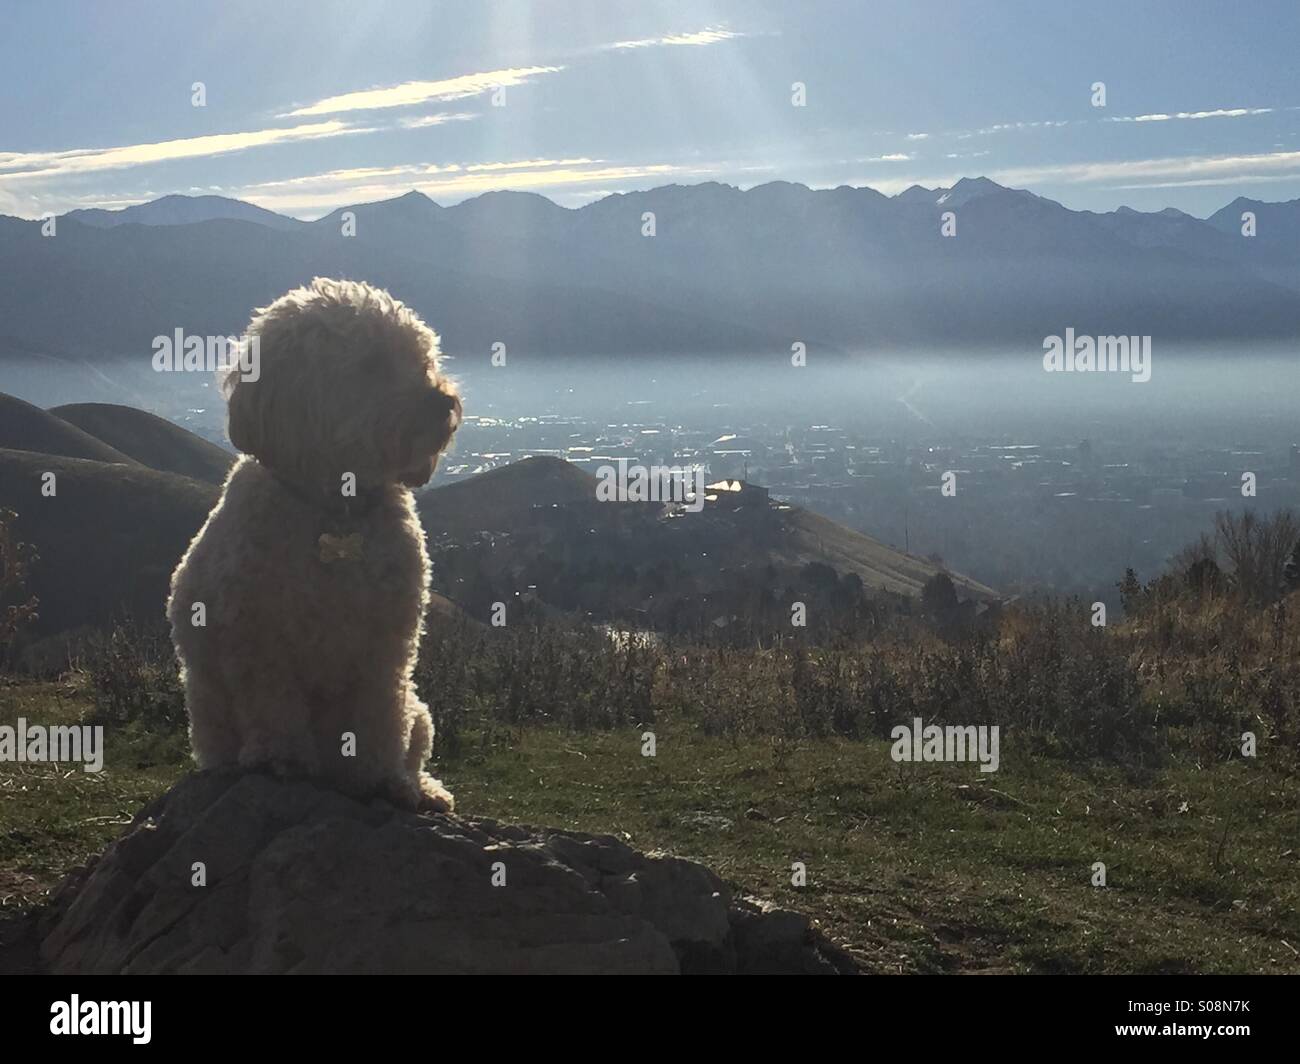 A small golden doodle dog rests on a rock on a hiking trail over looking an inversion-covered salt lake city, Utah. Stock Photo